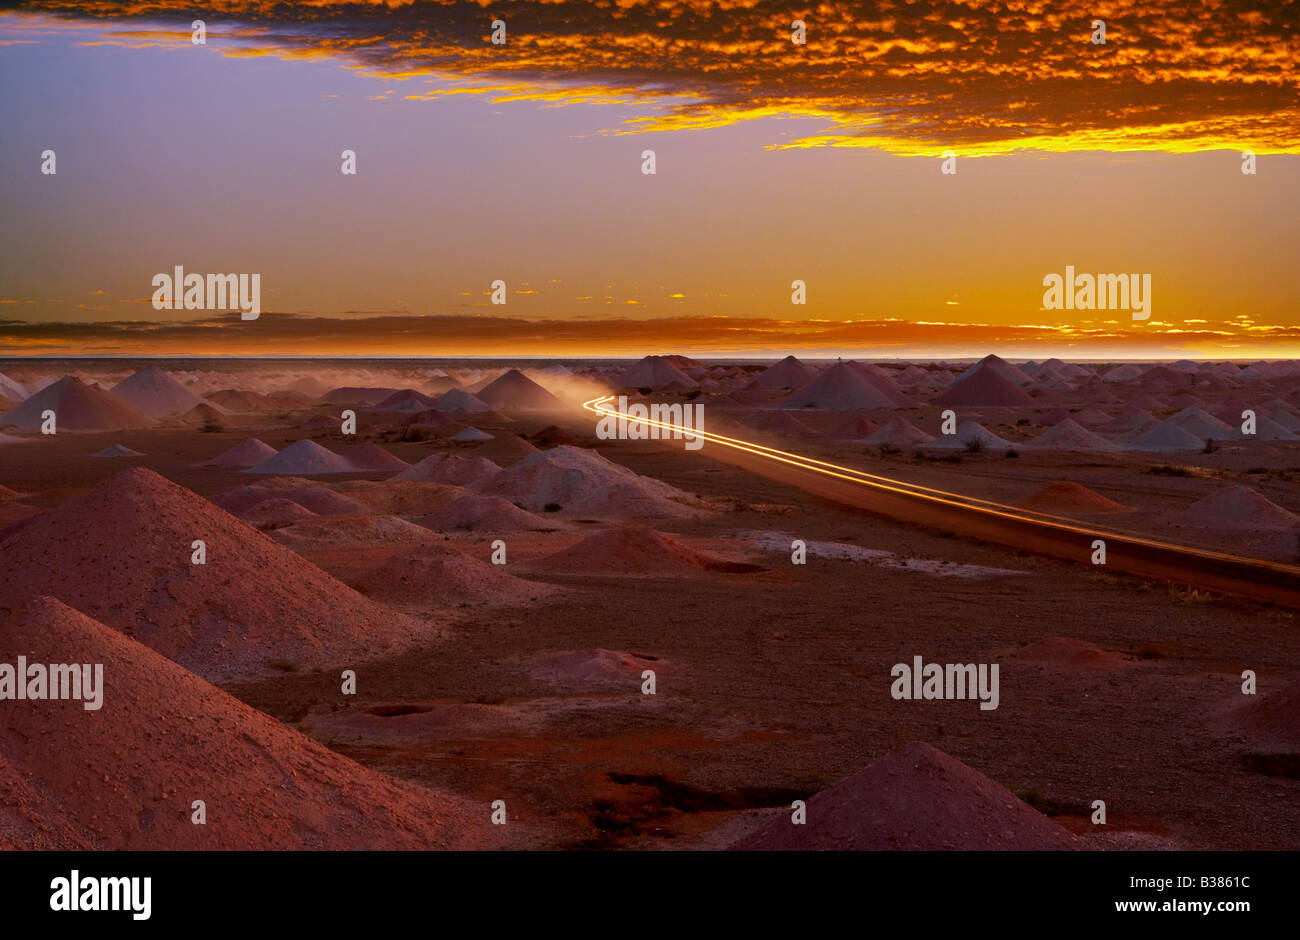 headlights driving through scene  Outback panorama of opal mines at sunset, Coober Pedy South Australia Stock Photo